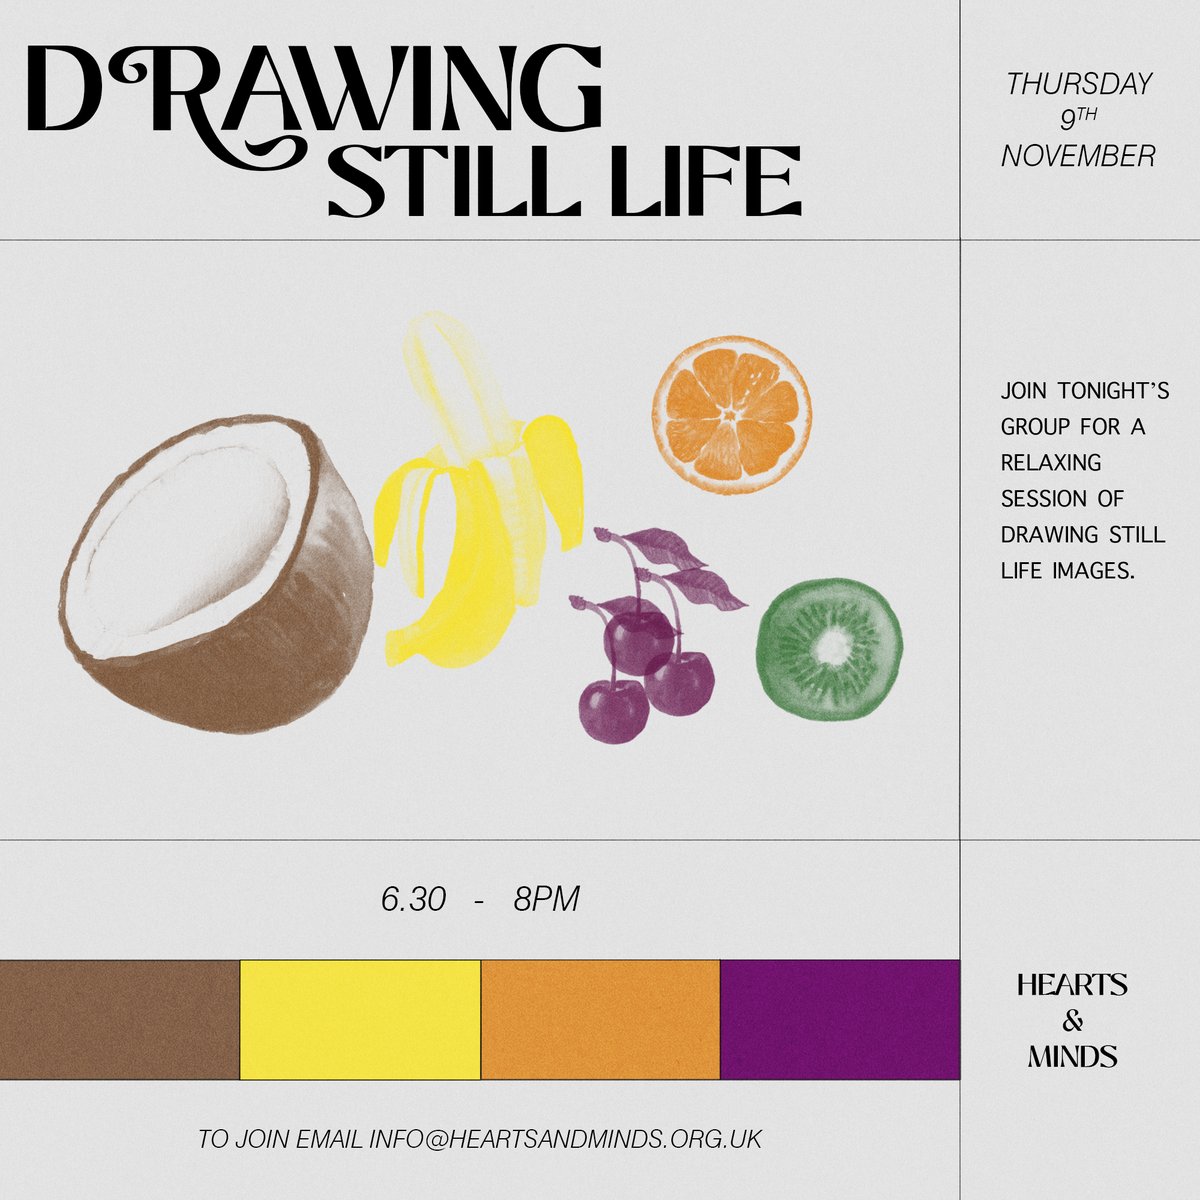 tonight! 6.30 - 8pm join us for tonight’s group. a super chilled, intimate evening of mindful still life drawing. focus on being present with objects of the world, and translating your person perception of them, distracting from any blues, and being in commmunity. 🥥🍌🍒🍊🍉🥭🫐